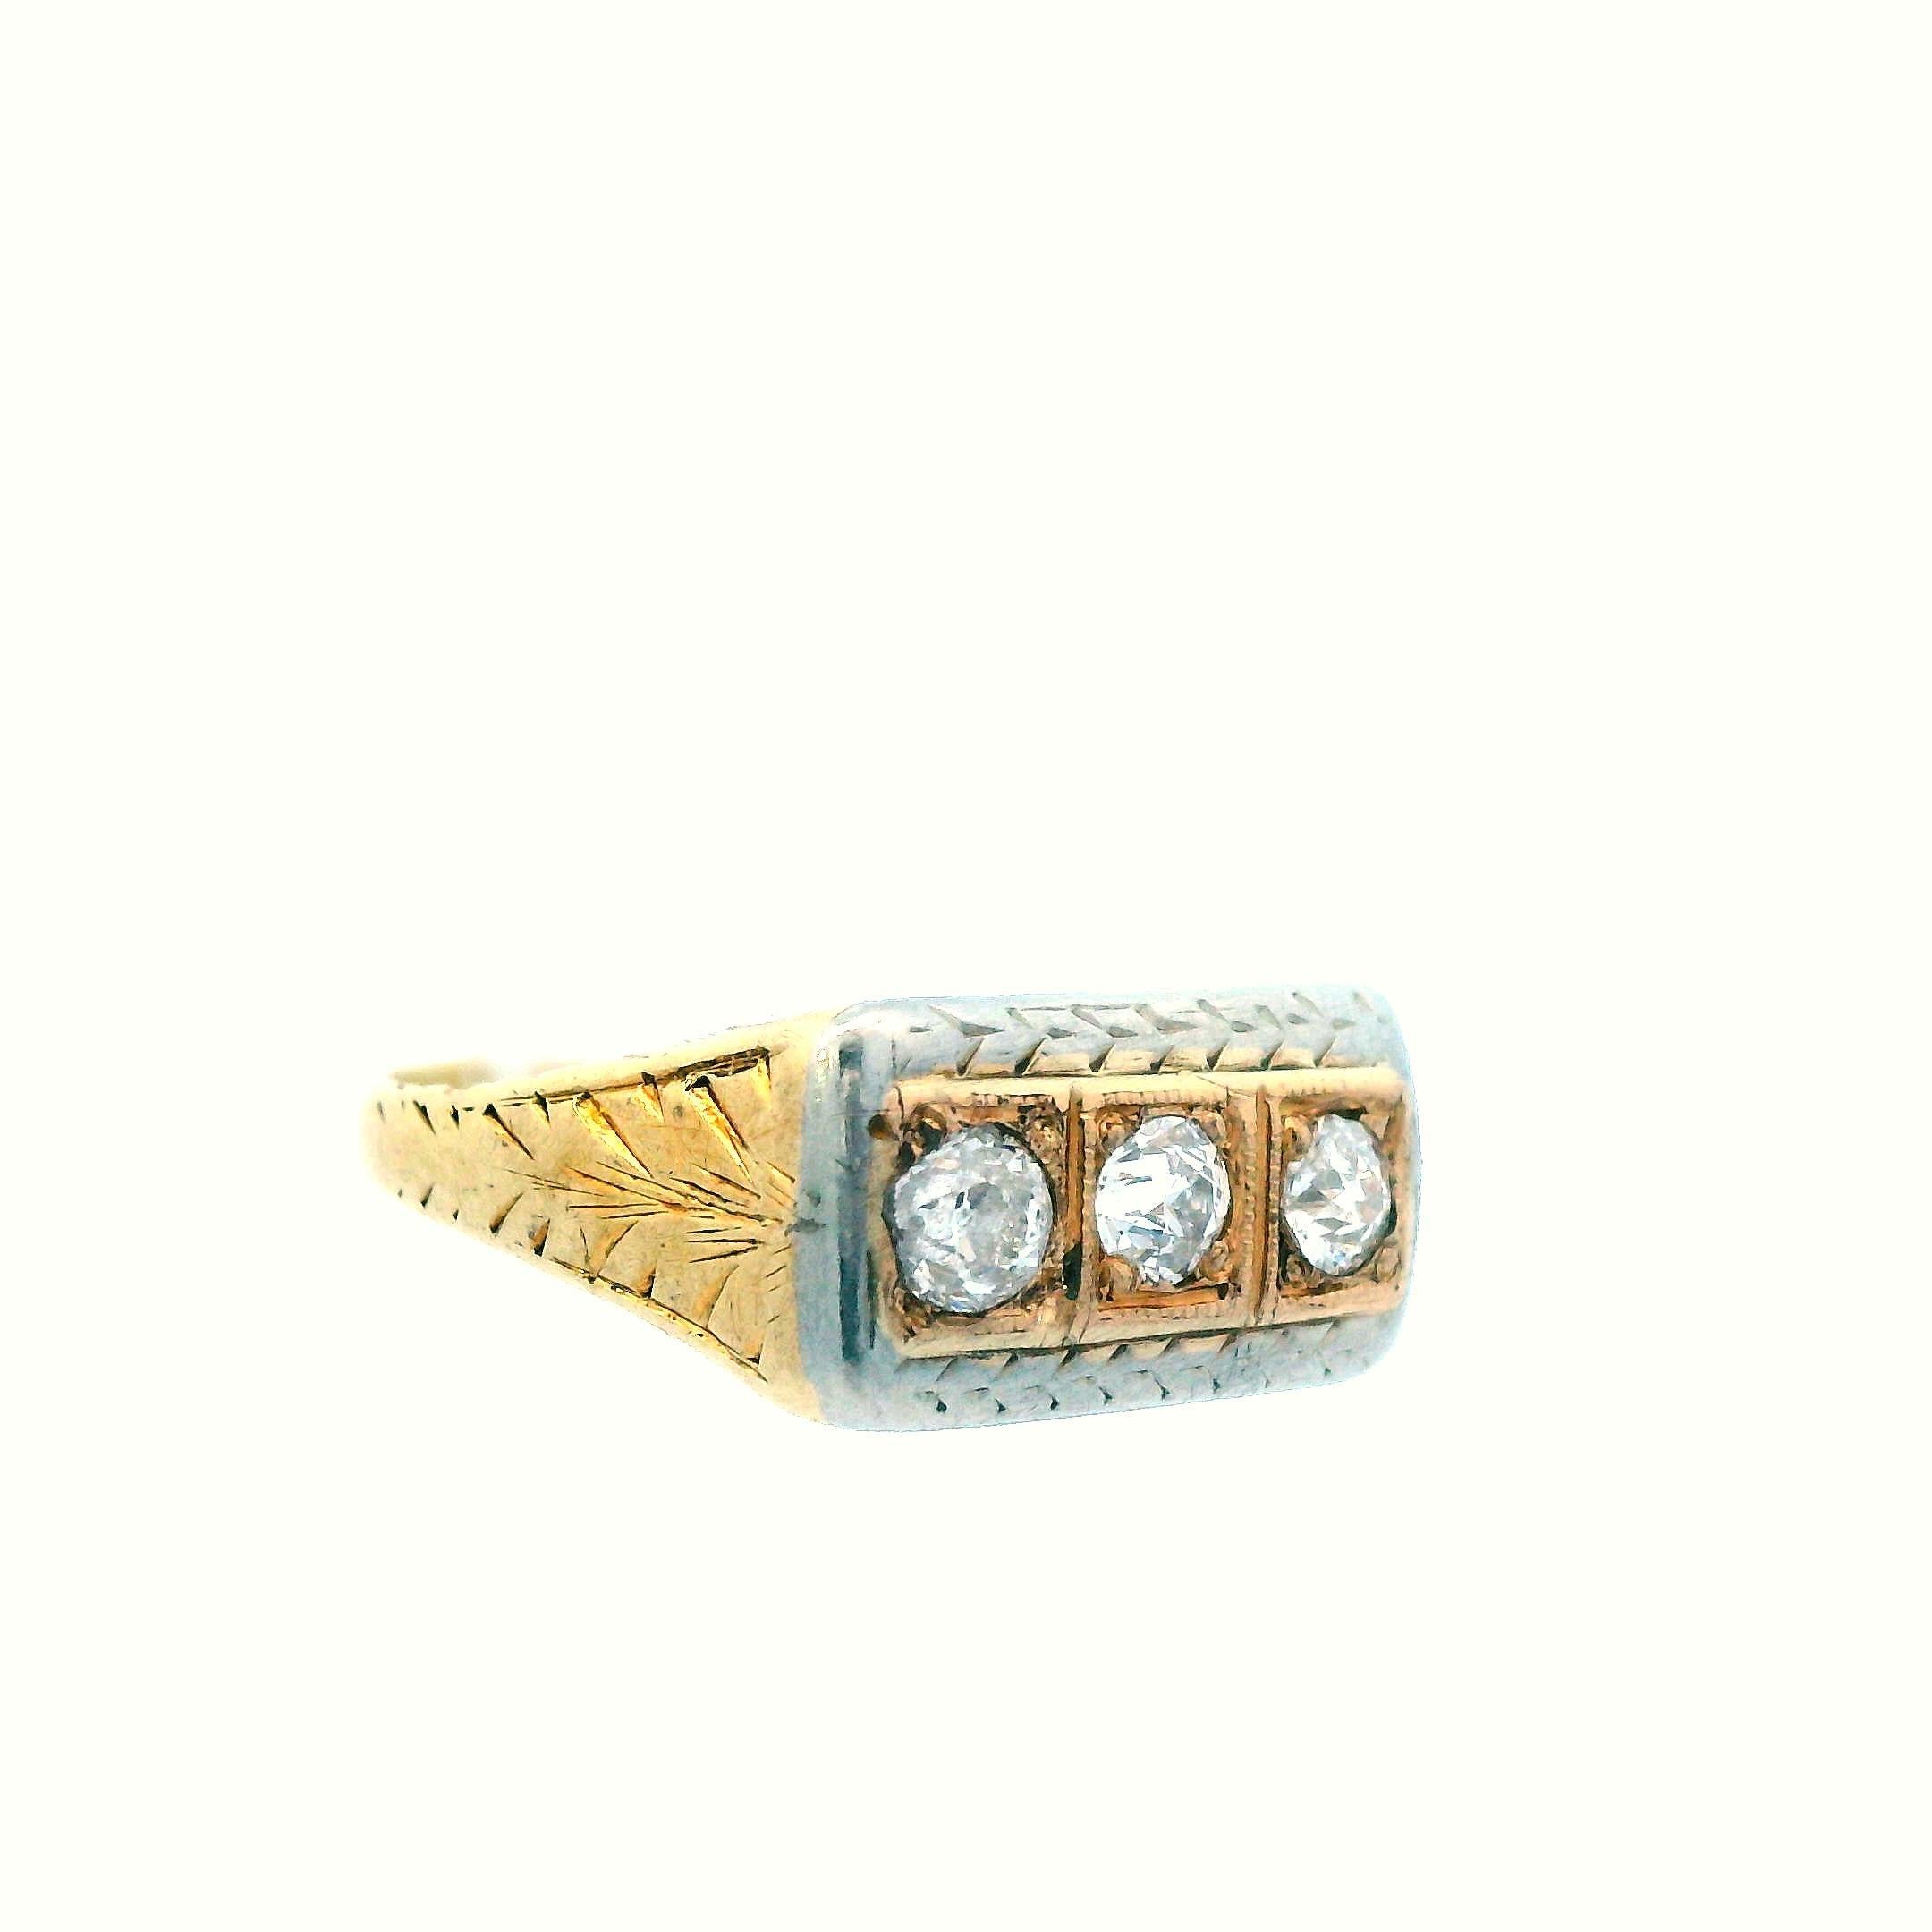 1925 Art Deco 14k Yellow and White Gold Two Tone Diamond 3 Stone Ring In Good Condition For Sale In Lexington, KY